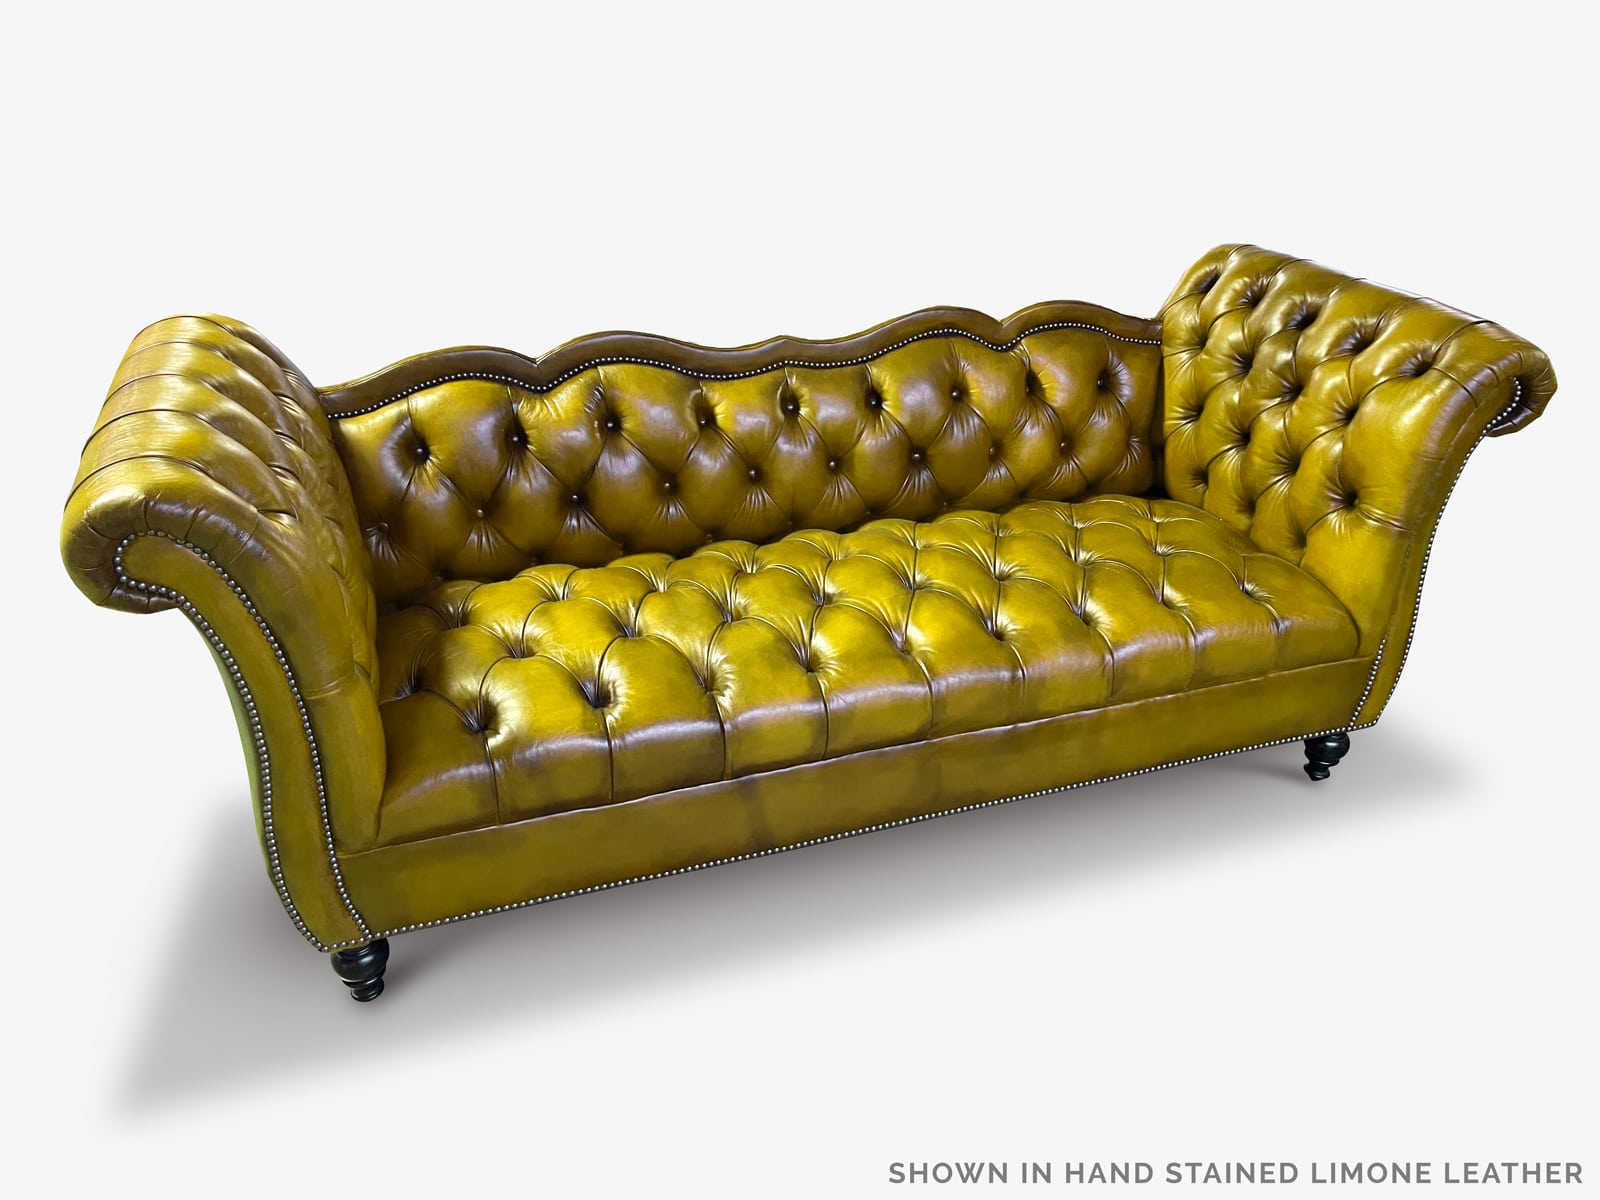 The Collins Custom Built Vintage Hand-Stained Limone Chesterfield Sofa